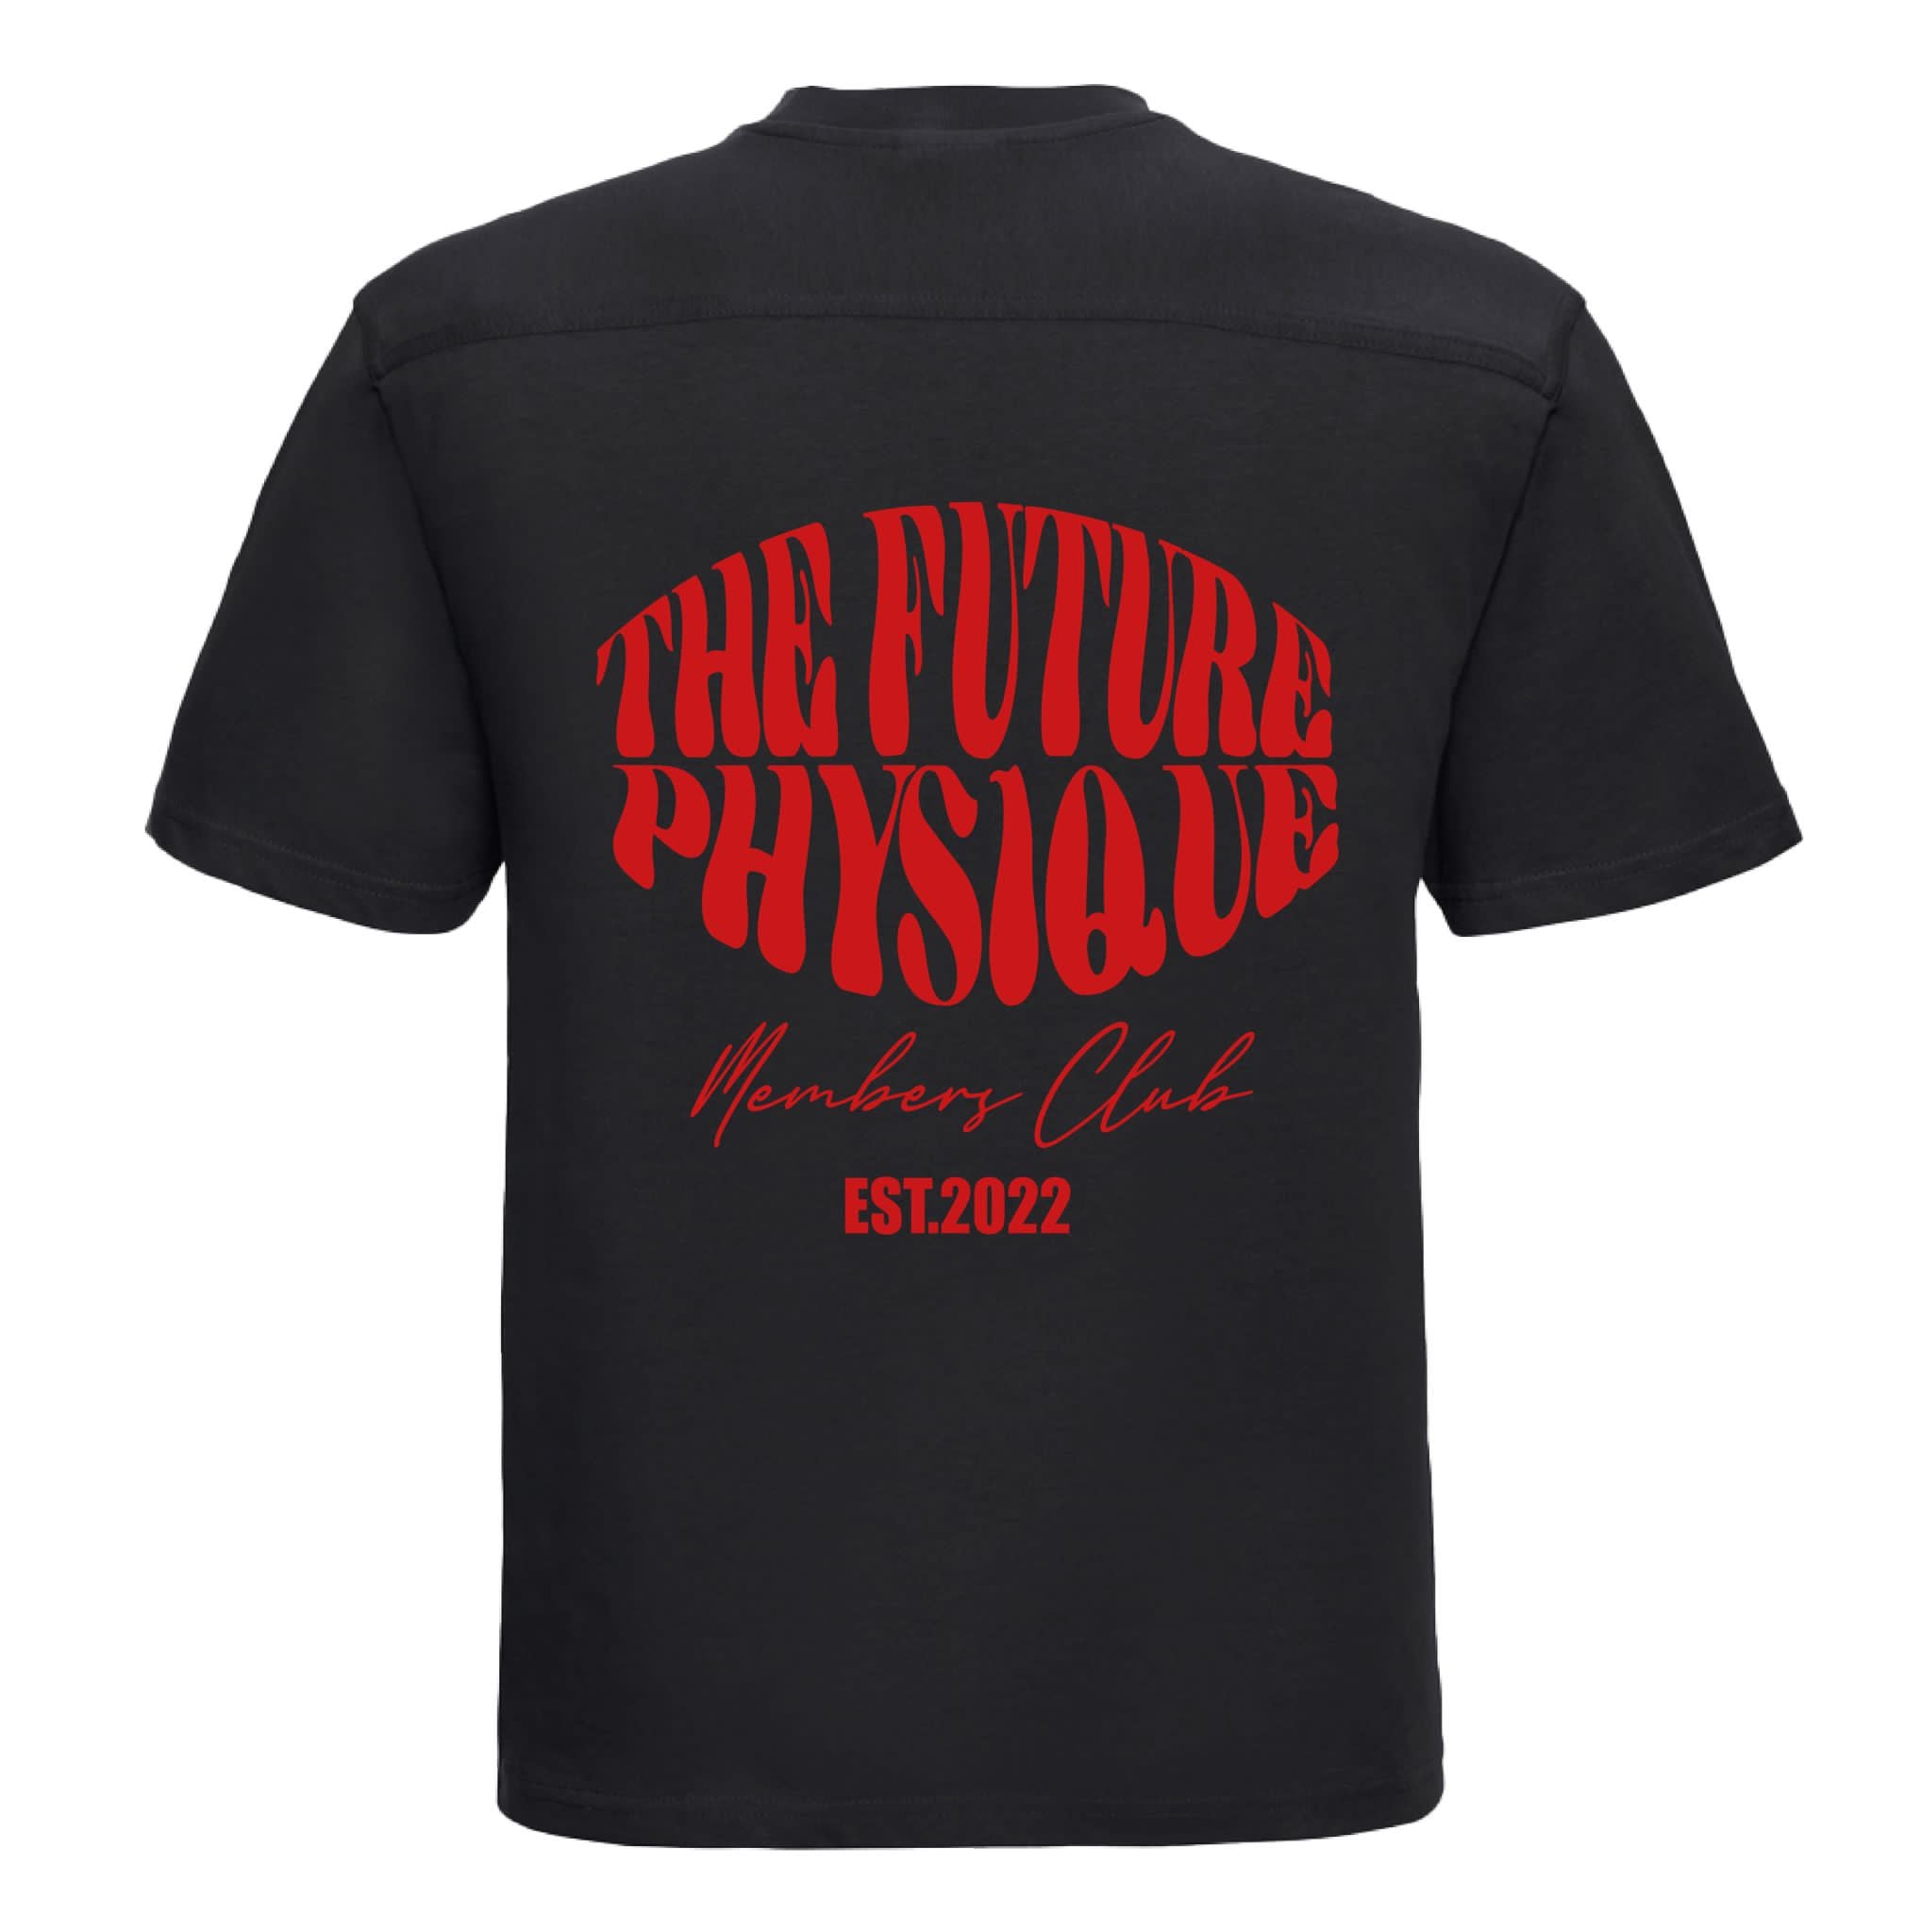 FBS Future Series - Over Sized Members Club T's (PRE ORDER) - Full Boar Sports